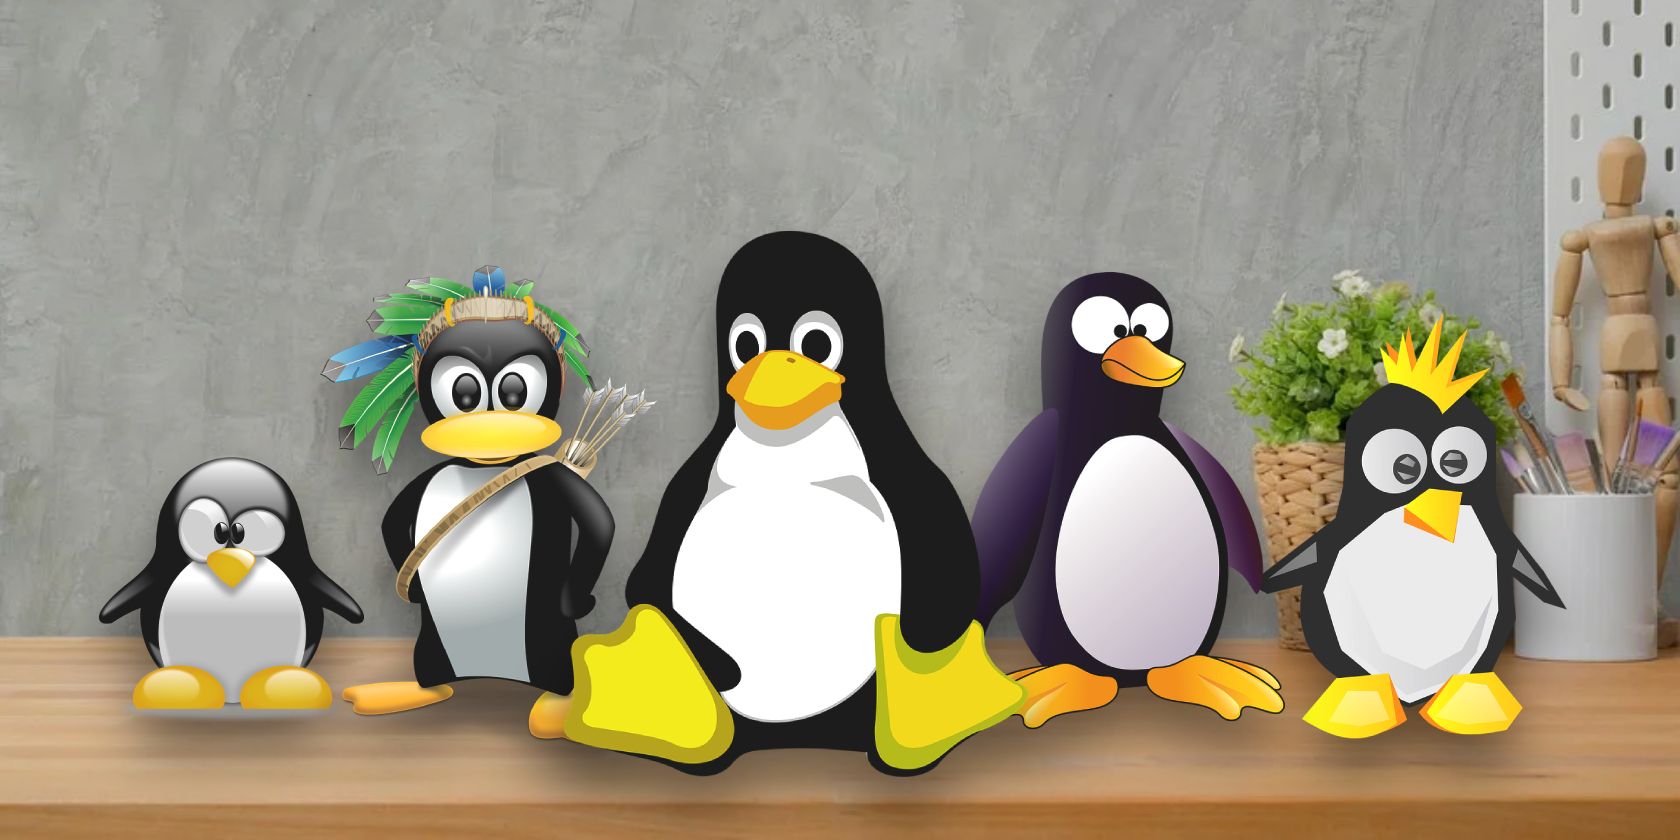 Why Does Linux Have So Many Distributions? Linux Distros Explained